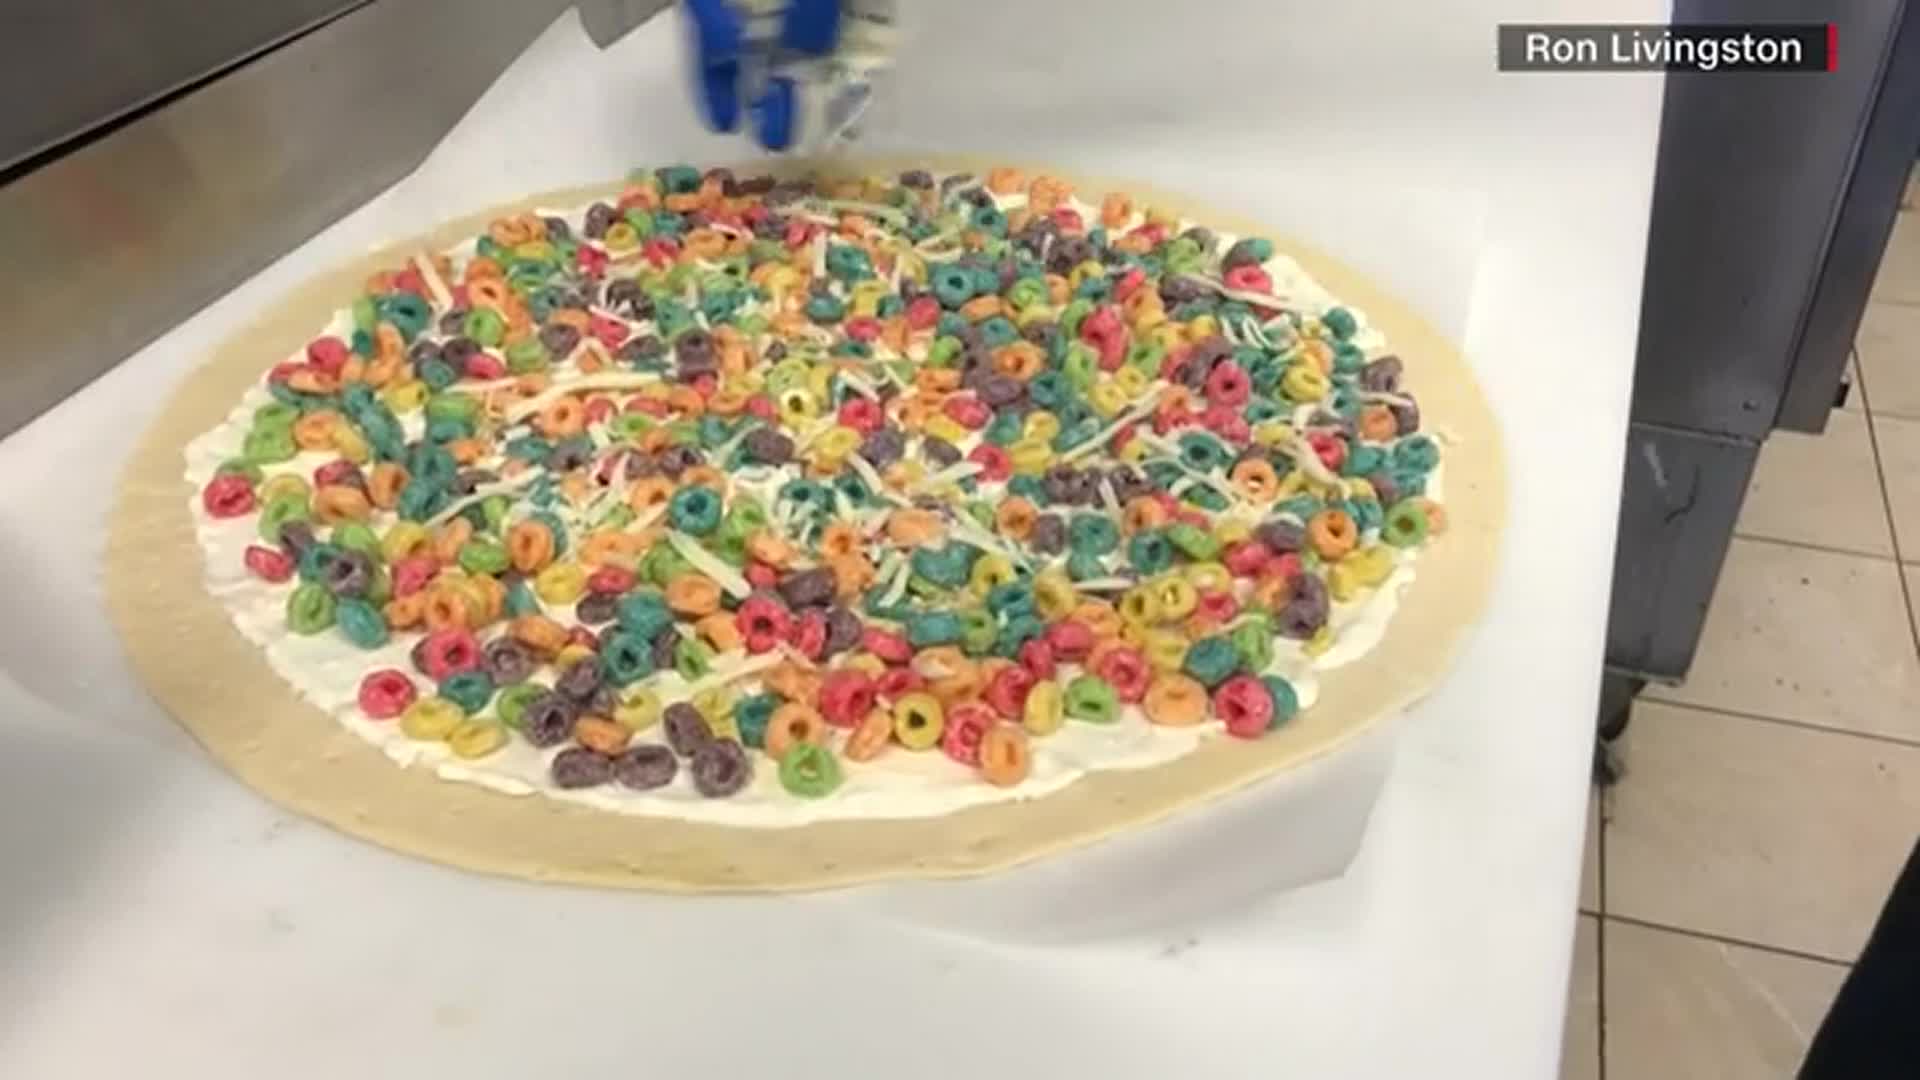 MOOS: PIZZA MADE WITH FROOT LOOPS TOPPING | CNN | wfmz.com